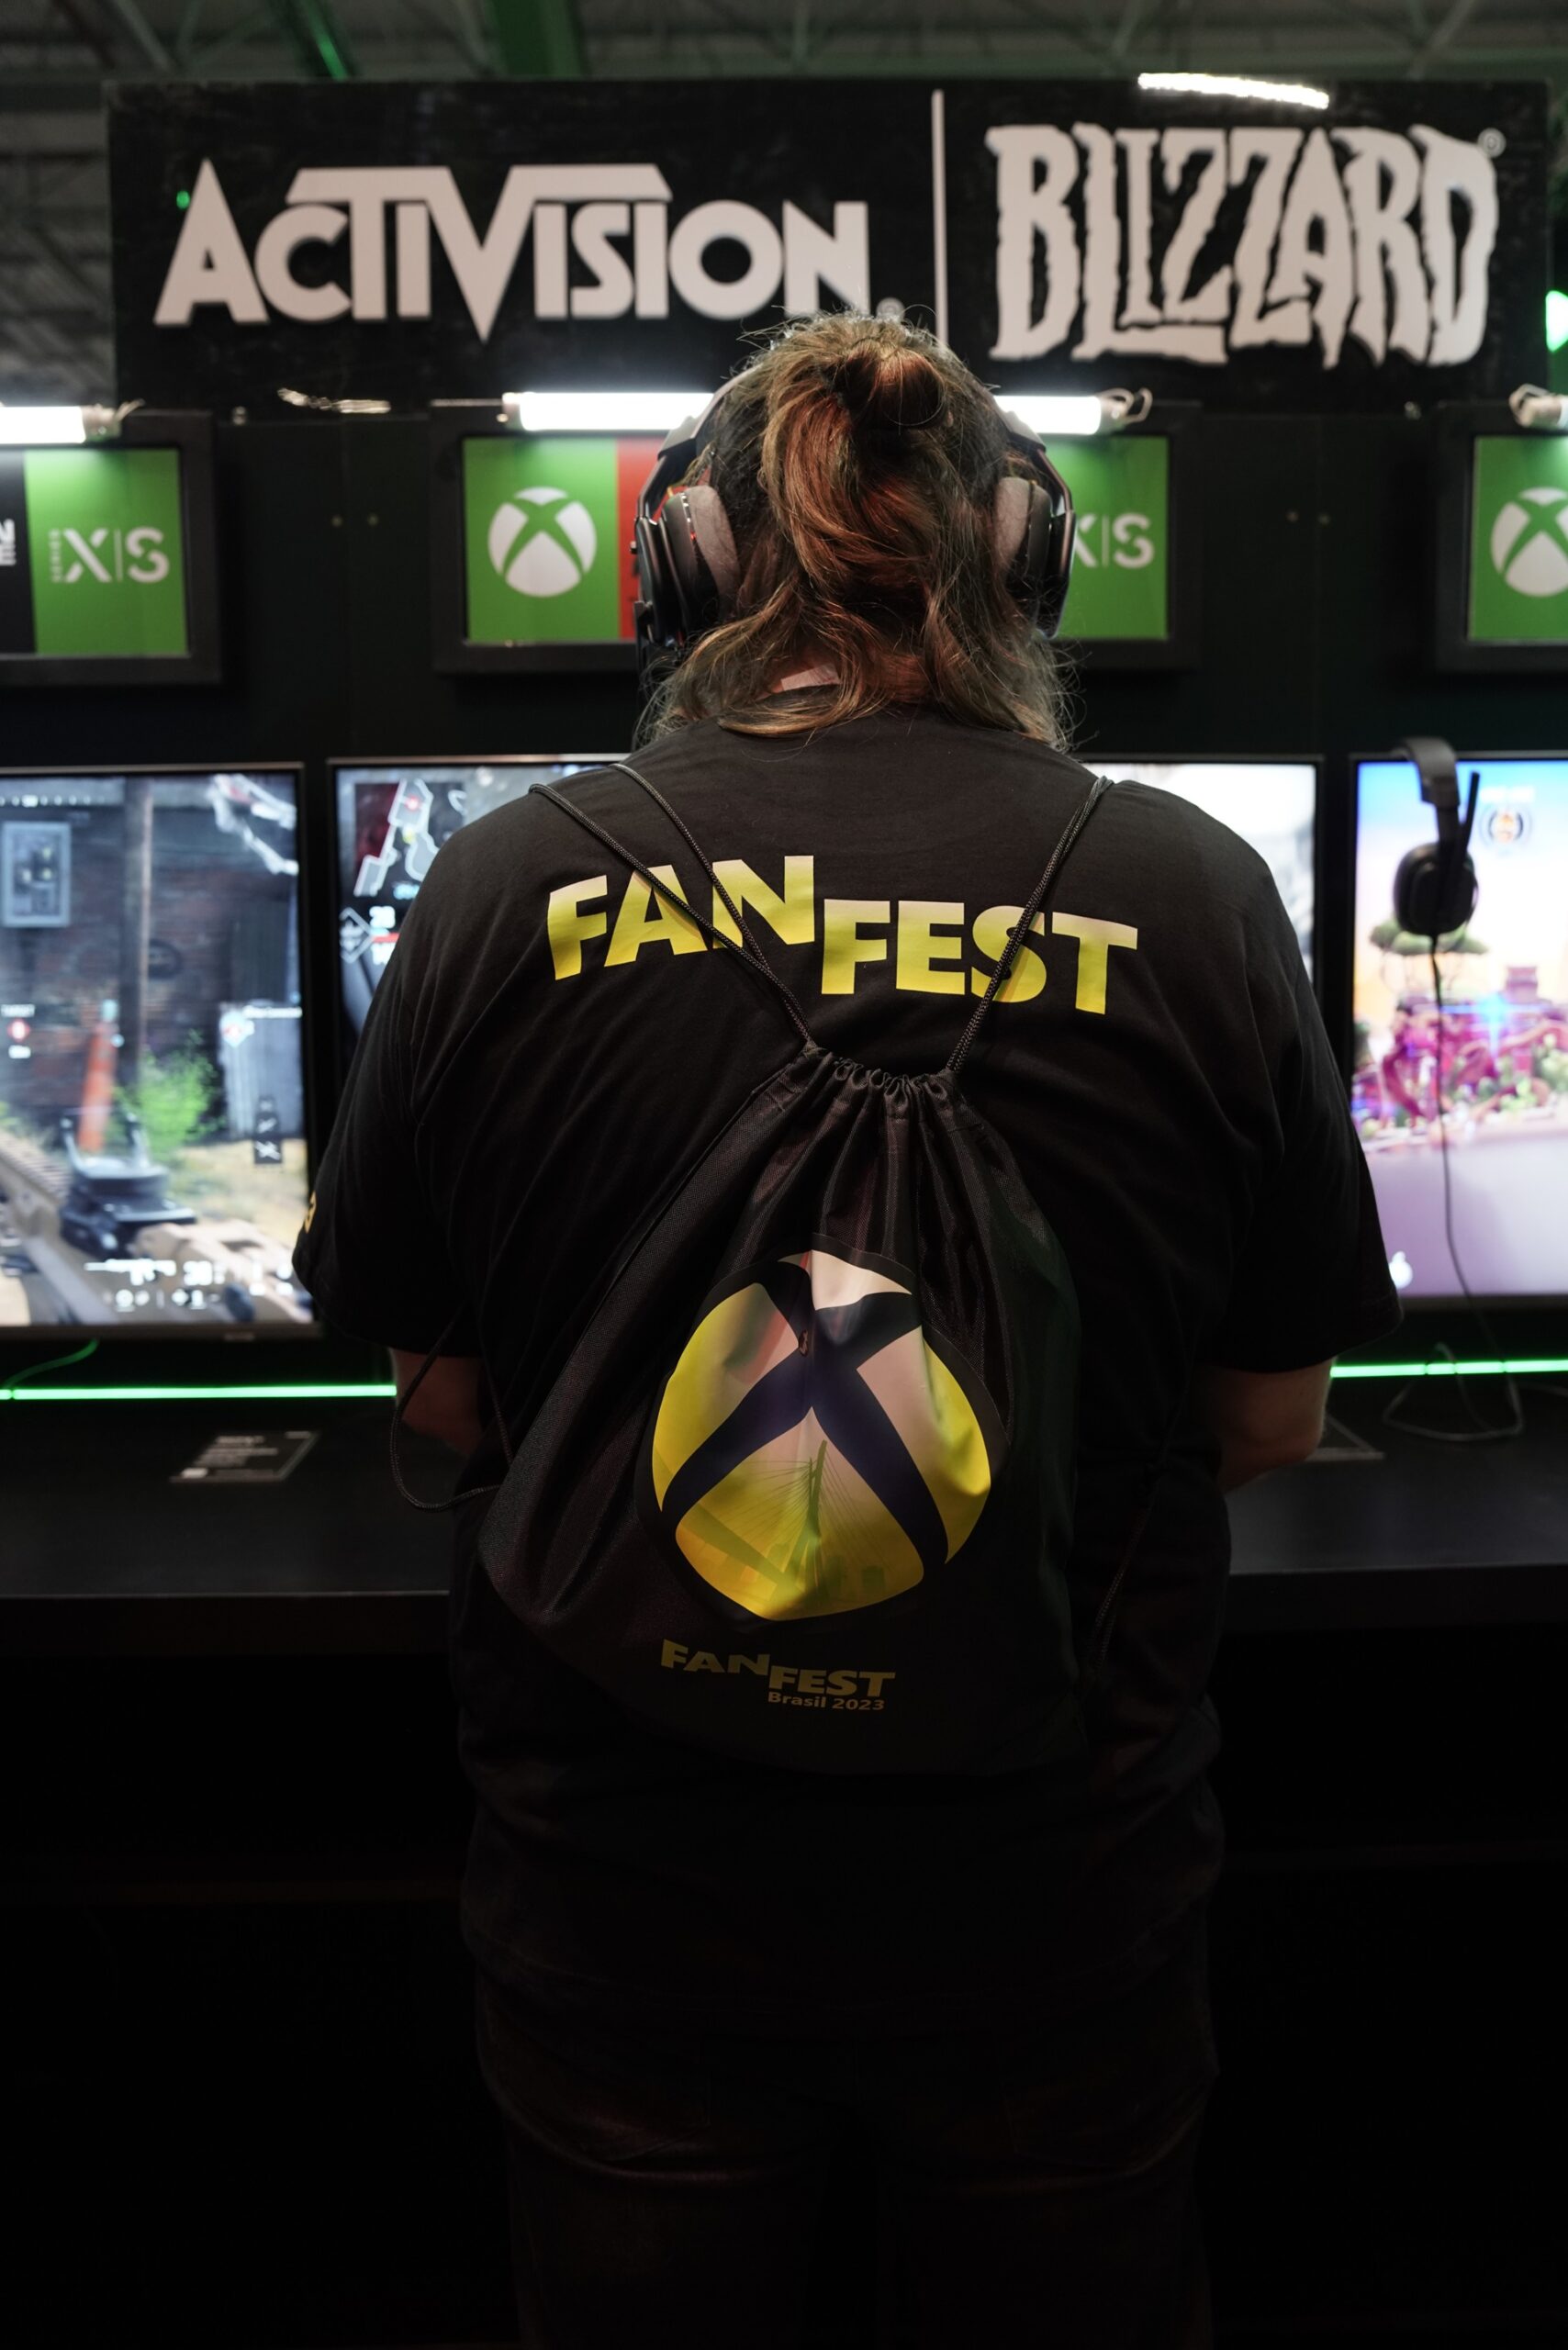 Klobrille on X: Xbox will have an Xbox Fanfest at the Comic Con